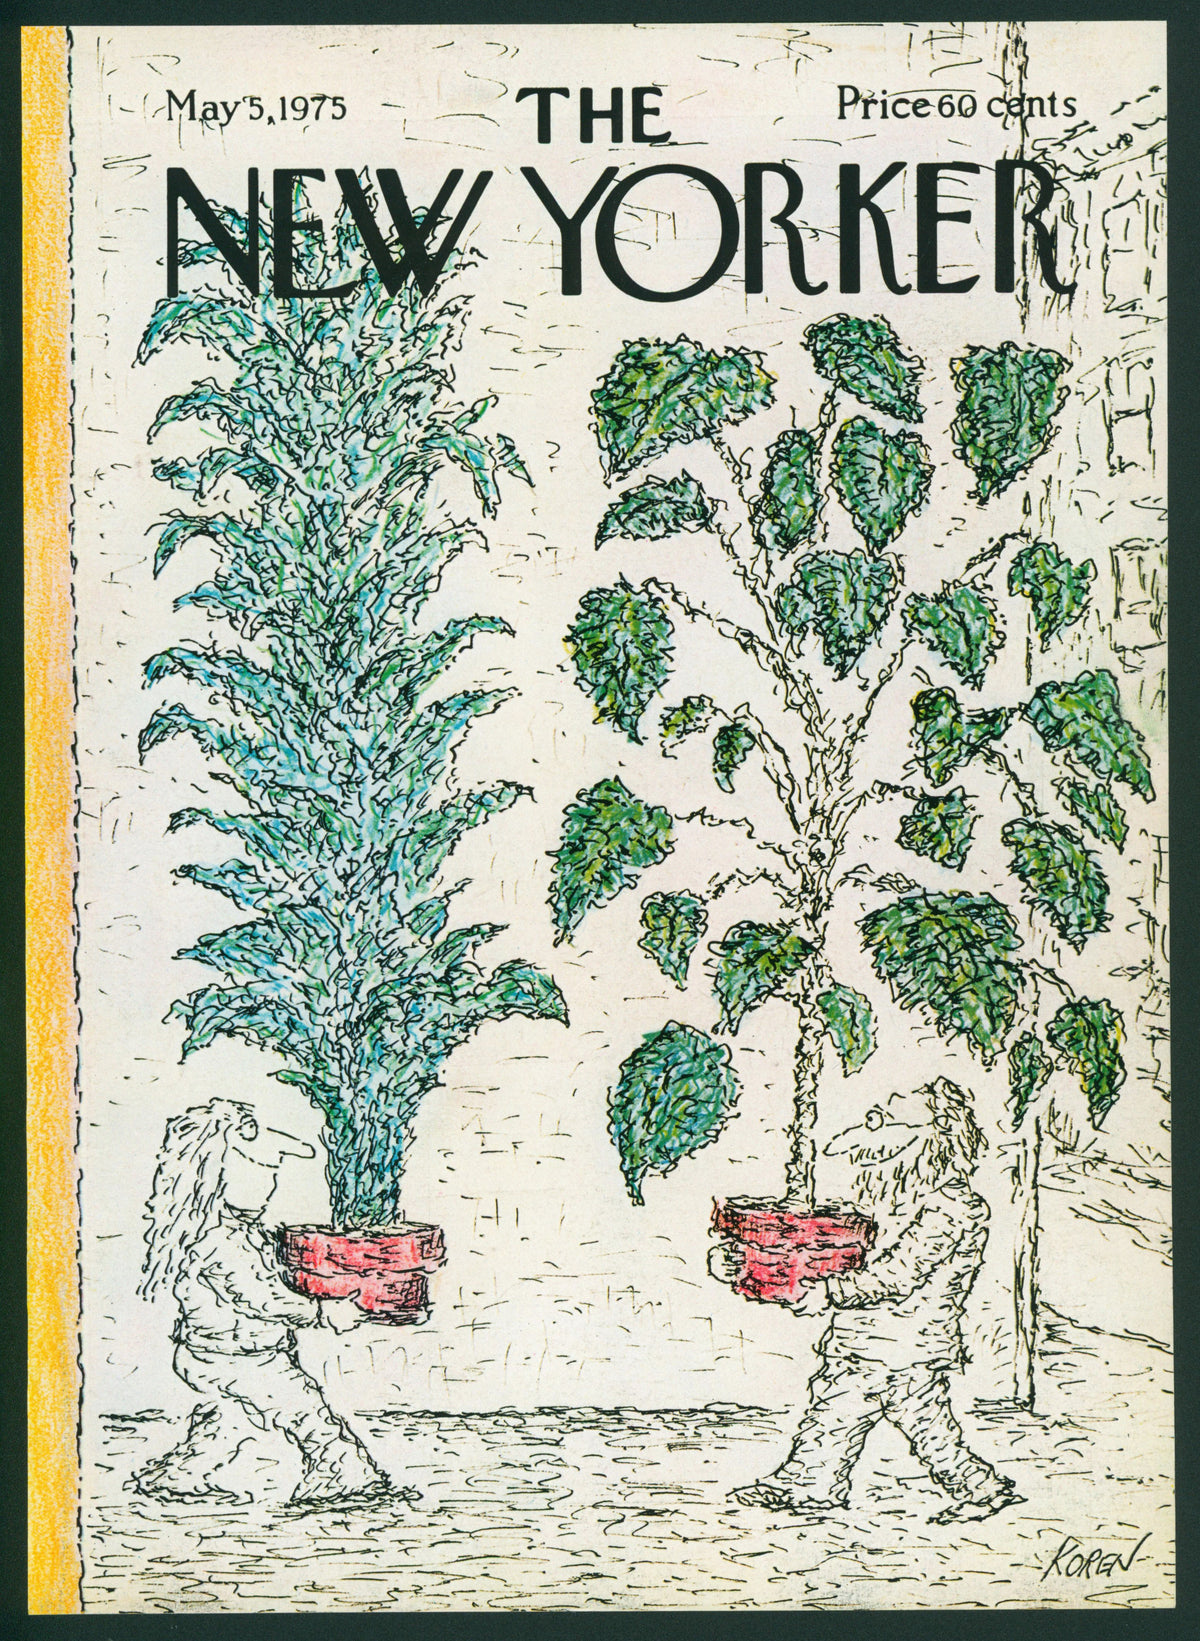 Planting Trees- The New Yorker - Authentic Vintage Antique Print